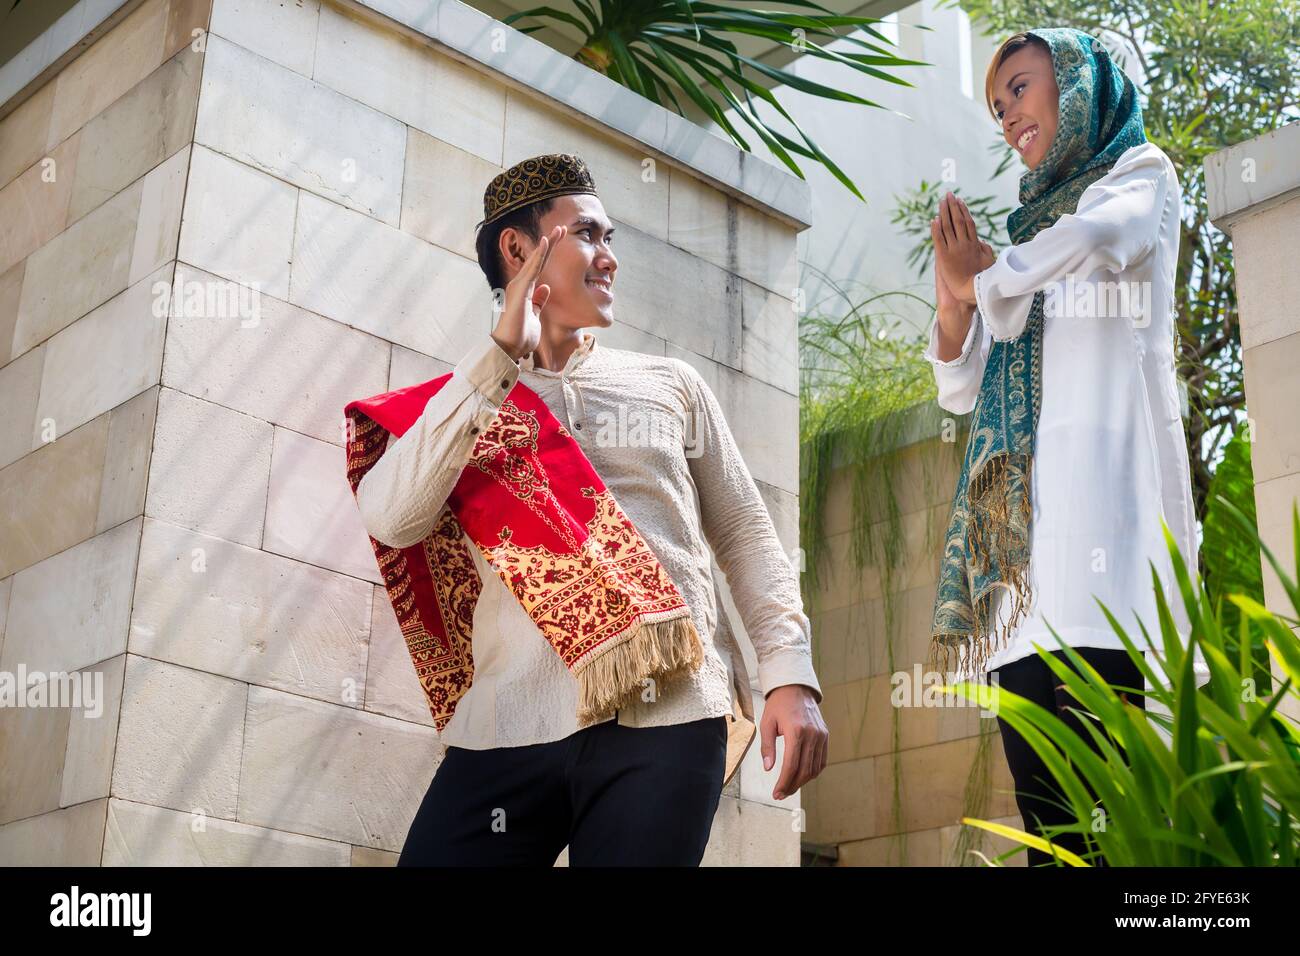 Asian Muslim man going to work leaving housewife woman wearing traditional dress Stock Photo